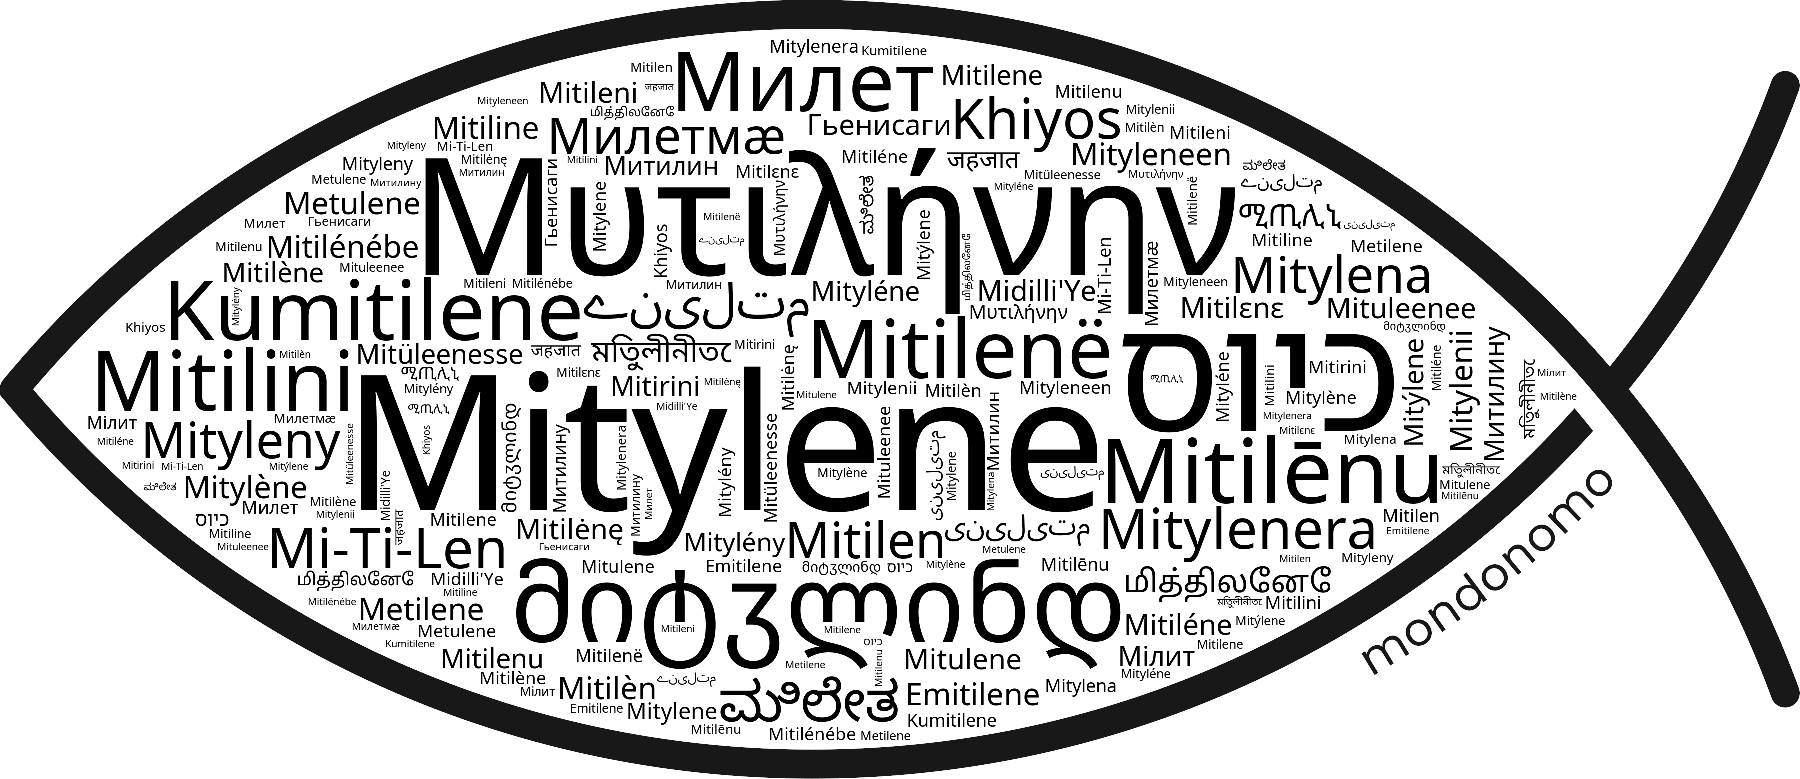 Name Mitylene in the world's Bibles